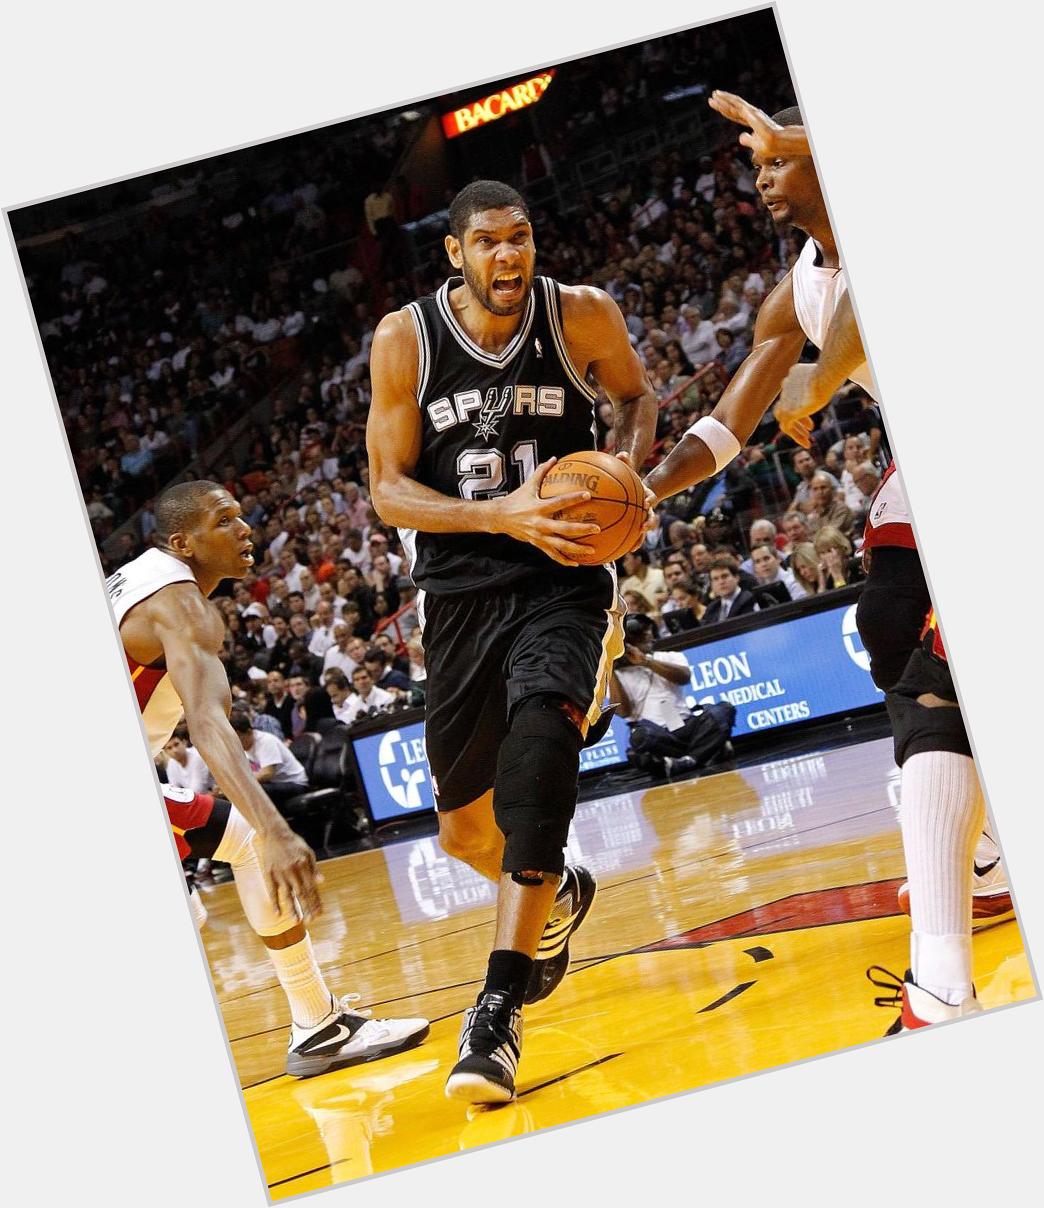 HAPPY BIRTHDAY TO THE BEST PW EVER! TIM DUNCAN     